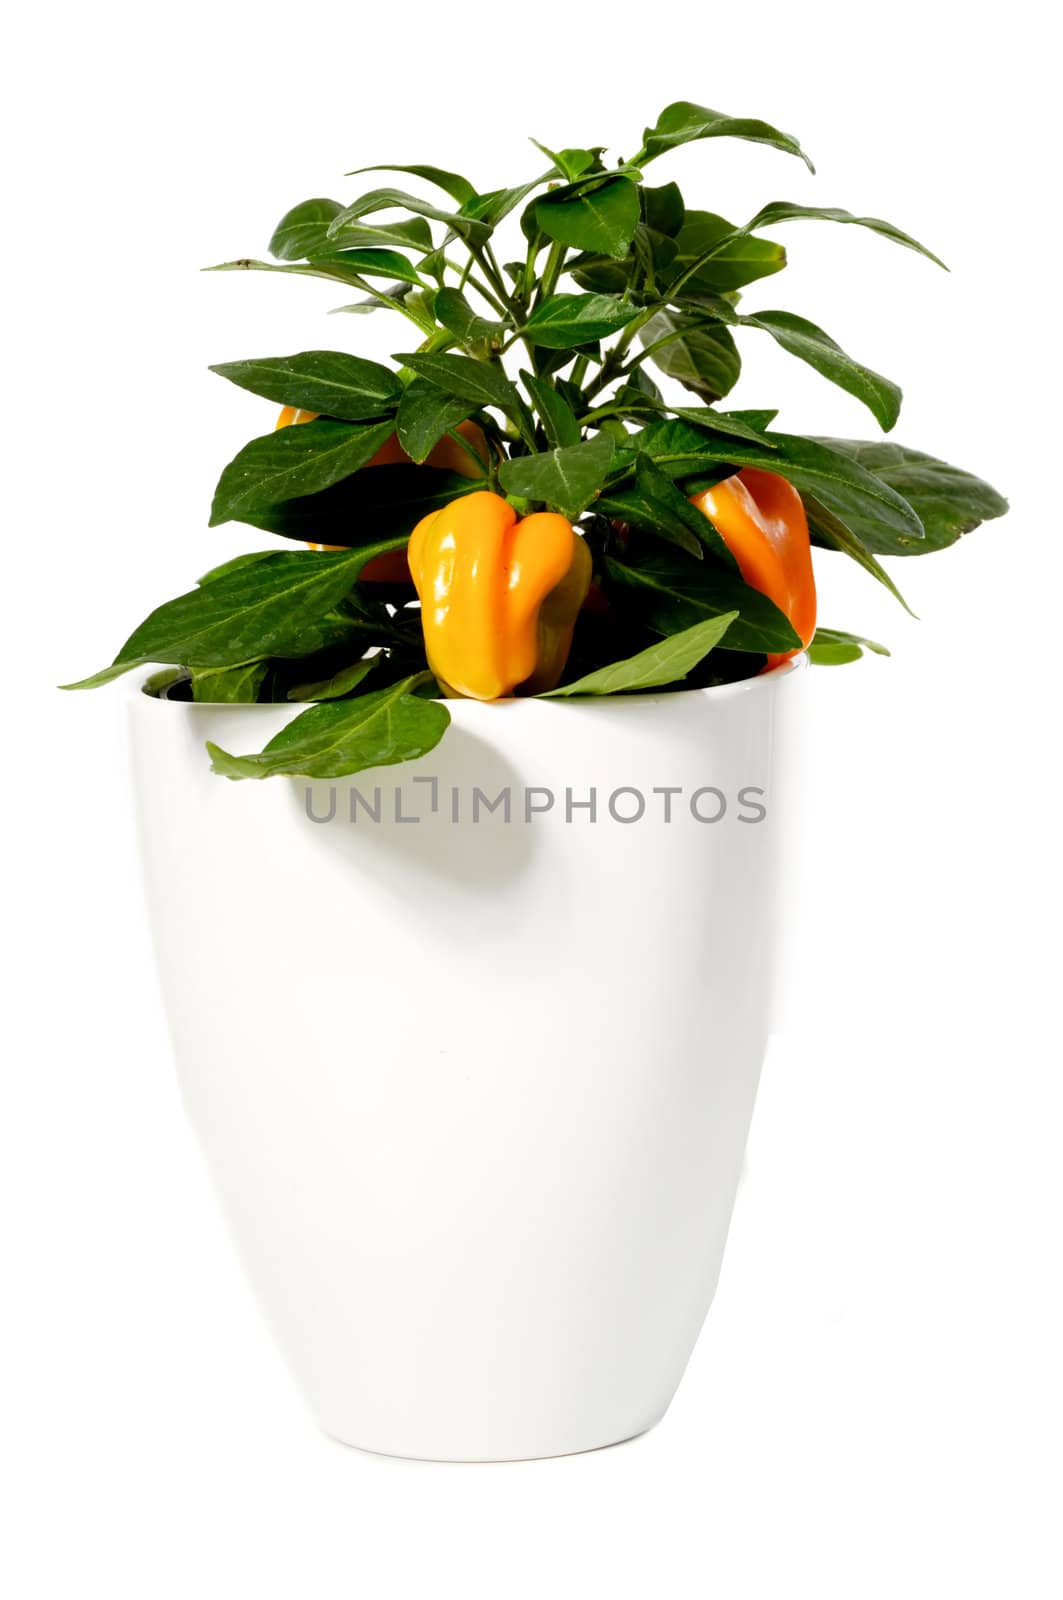 Orange pepper is growing in pot. Isolated on a white background.